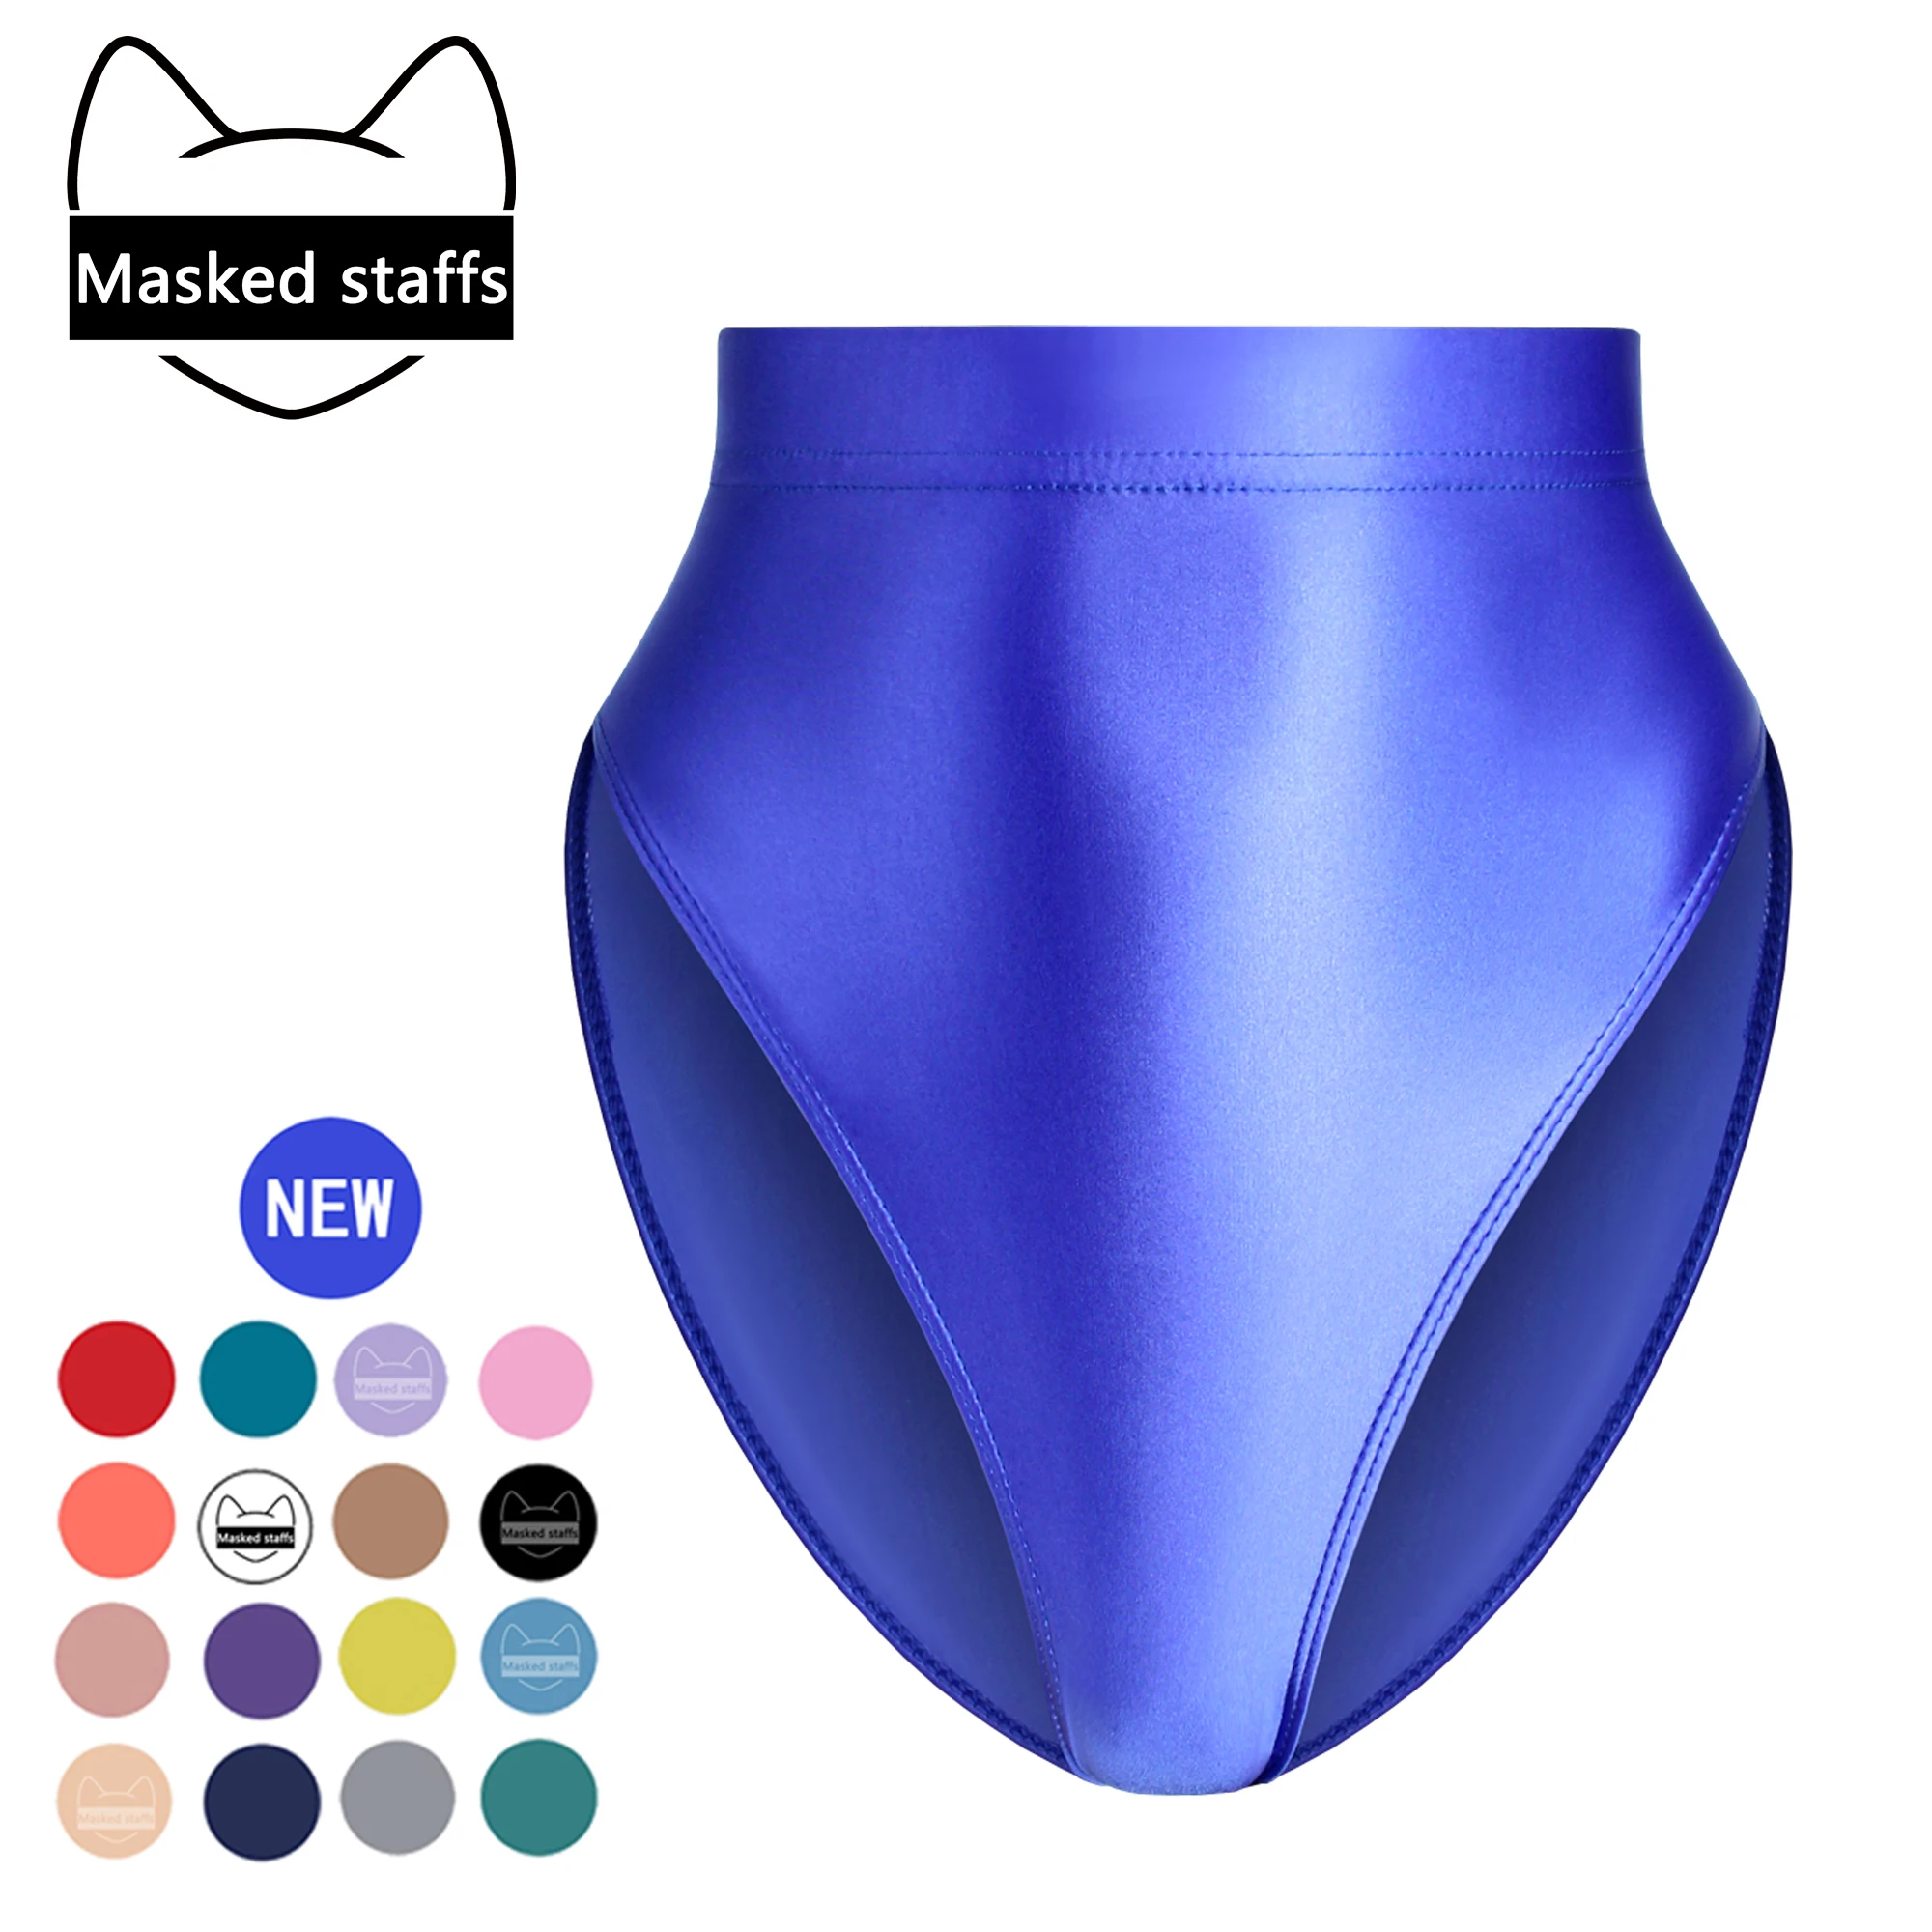 

Masked staffs glossy T-shaped pants with buttocks sexy Silky solid bikini high waist tights underpants and high fork Oily briefs